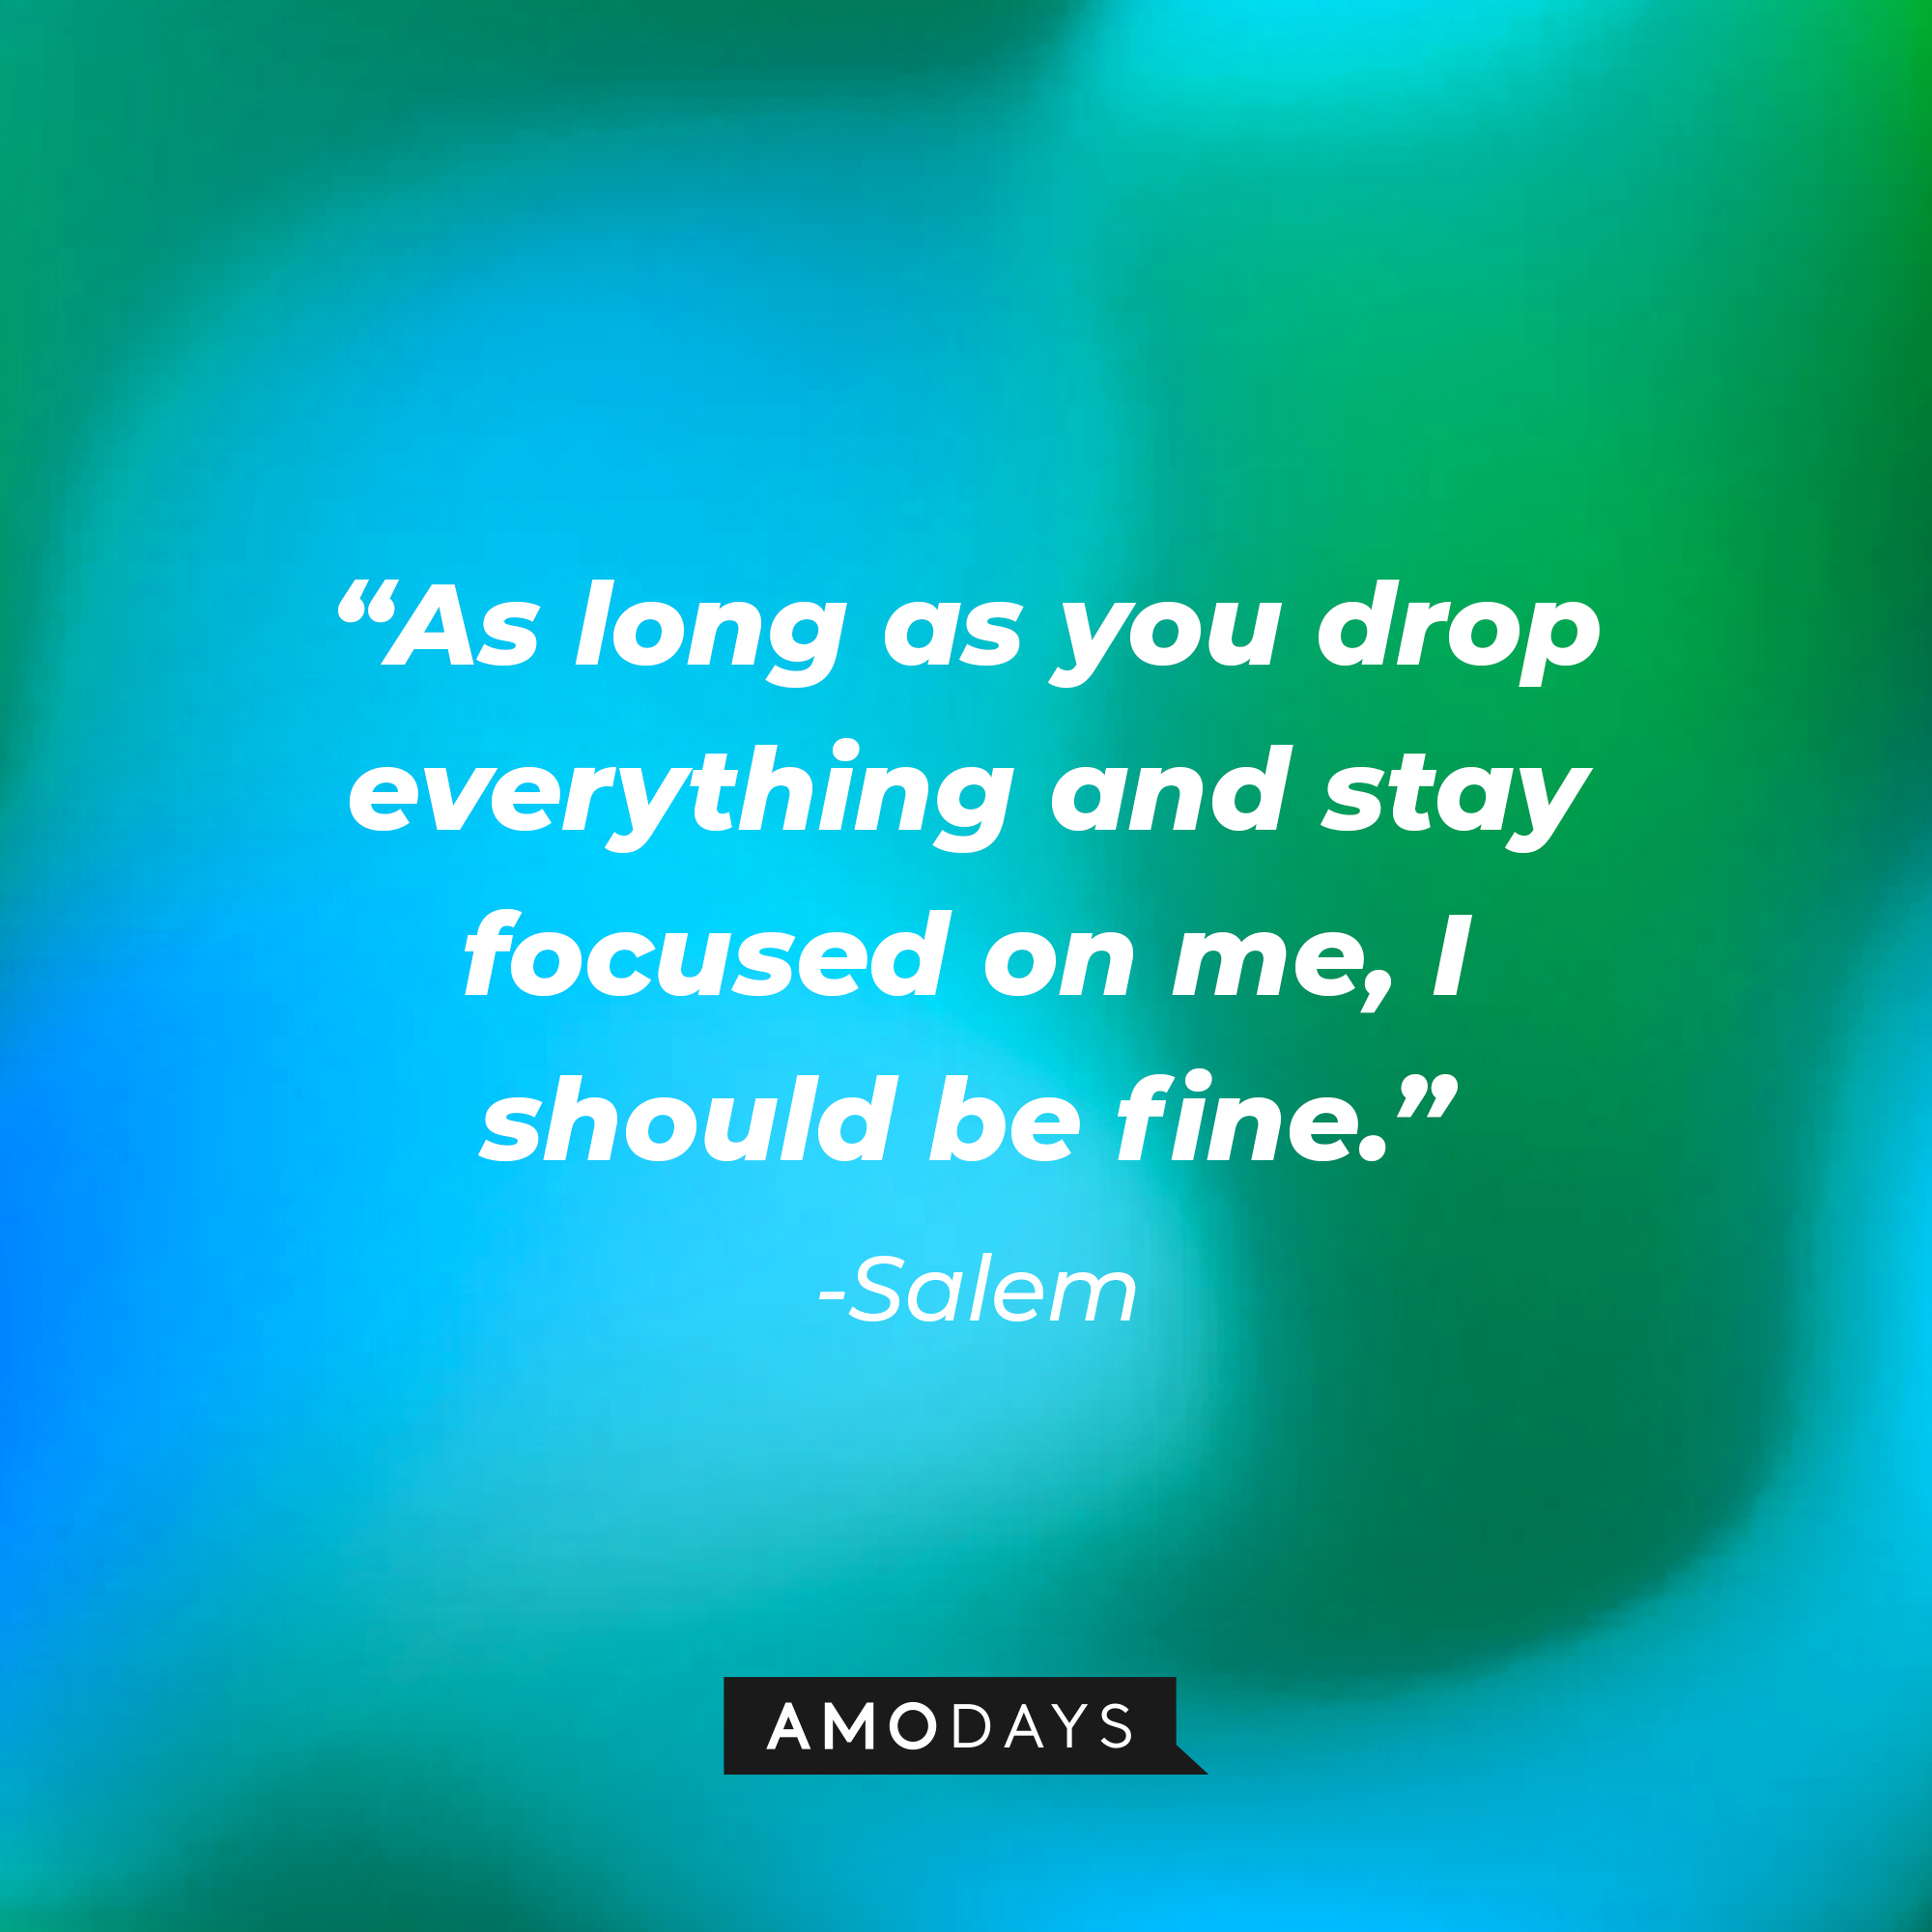 Salem’s quote: “As long as you drop everything and stay focused on me, I should be fine.” | Source: AmoDays